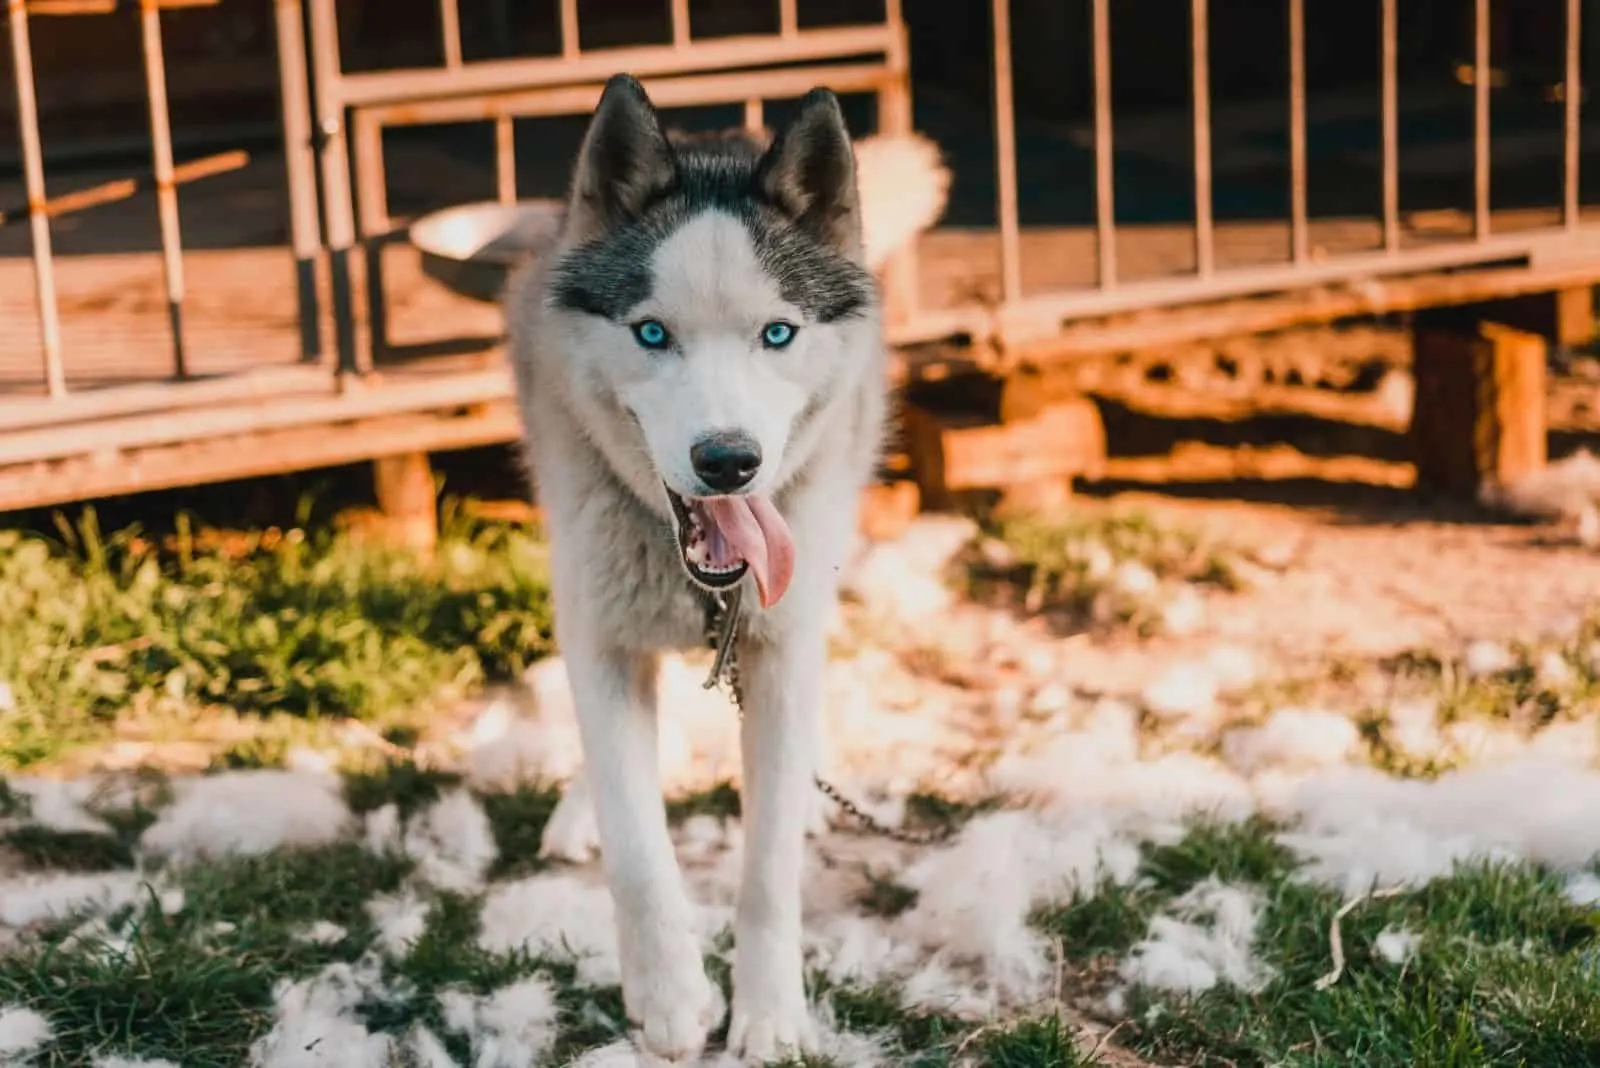 Siberian Husky walks near his cage chained to a collar shedding fur